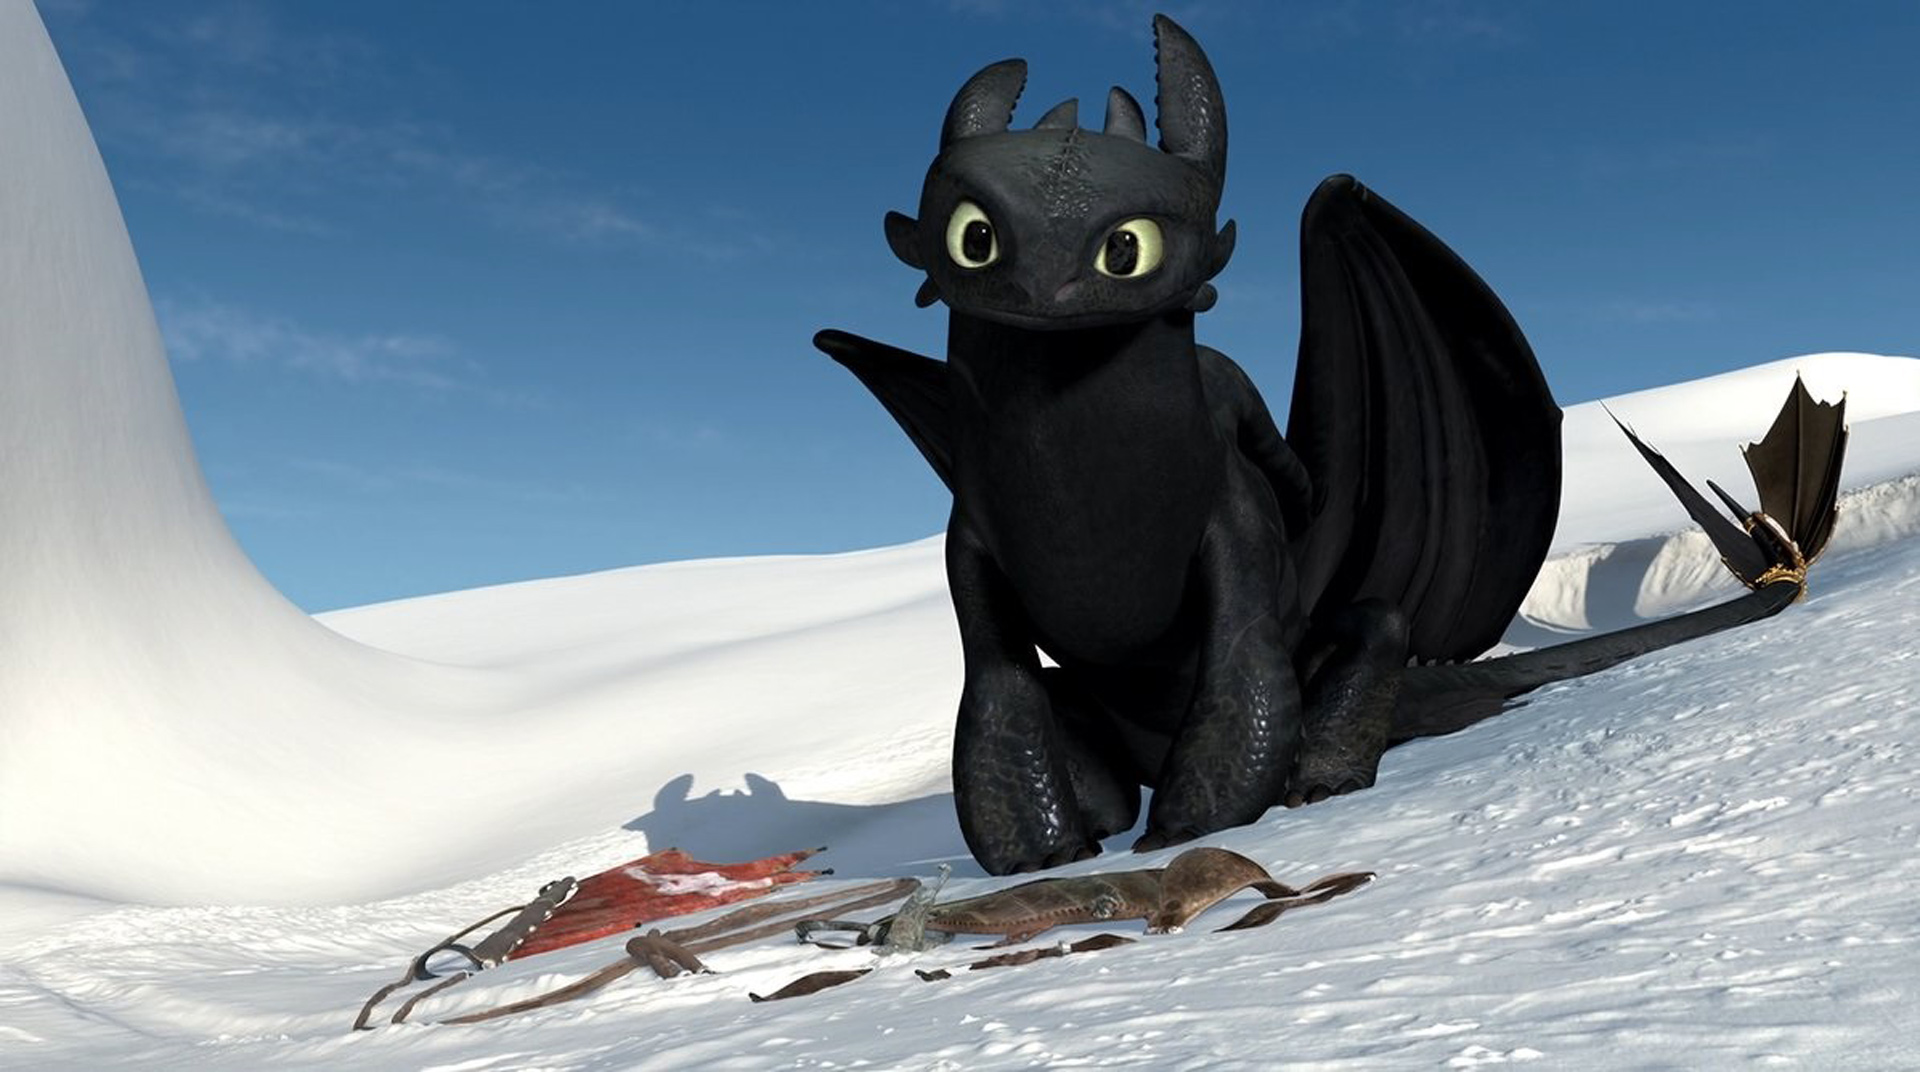 How To Train Your Dragon Backgrounds, Compatible - PC, Mobile, Gadgets| 1920x1072 px